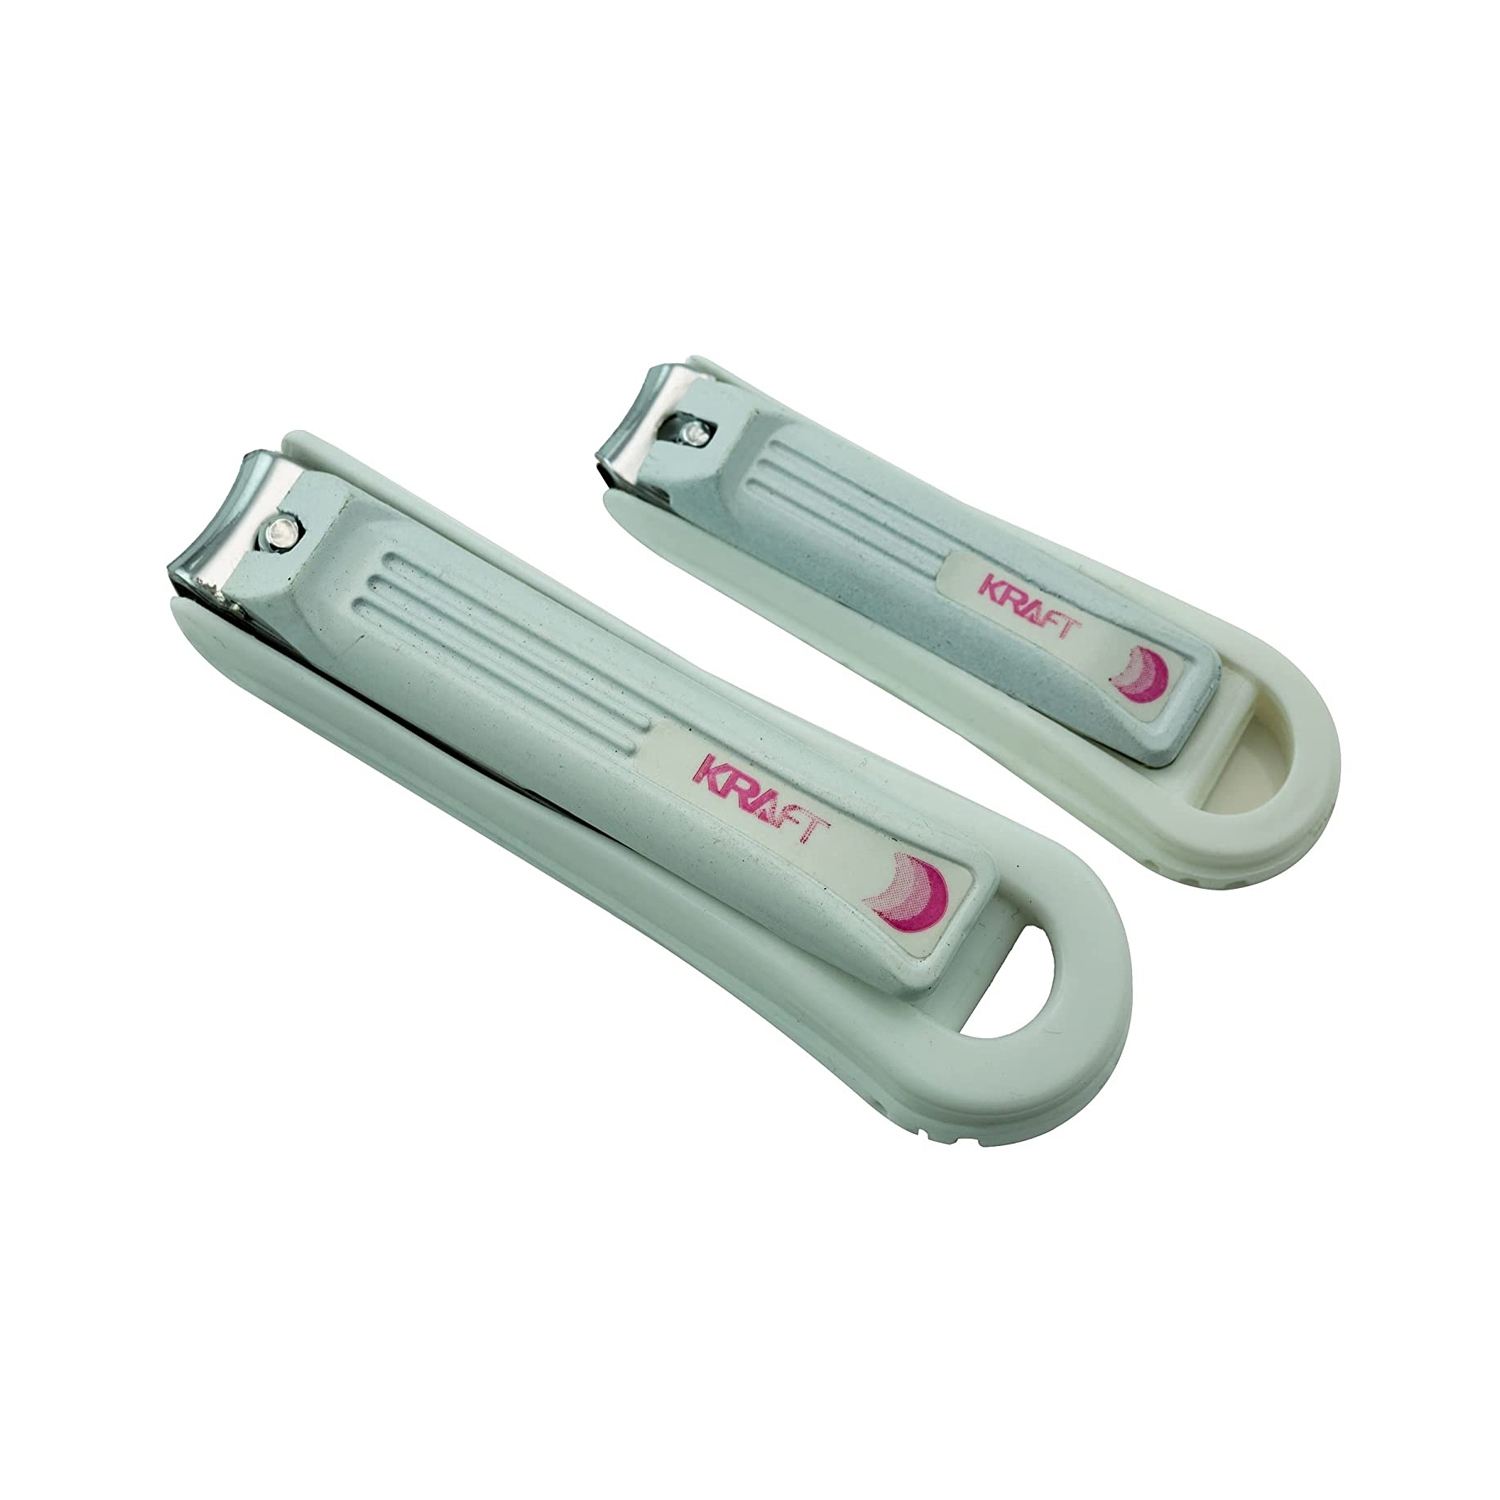 Amazon.com: G.S Nail Cutter/Nipper/Trimmer Toe/Hand Heavy Duty Podiatry 4  X, 4 Joints : Beauty & Personal Care